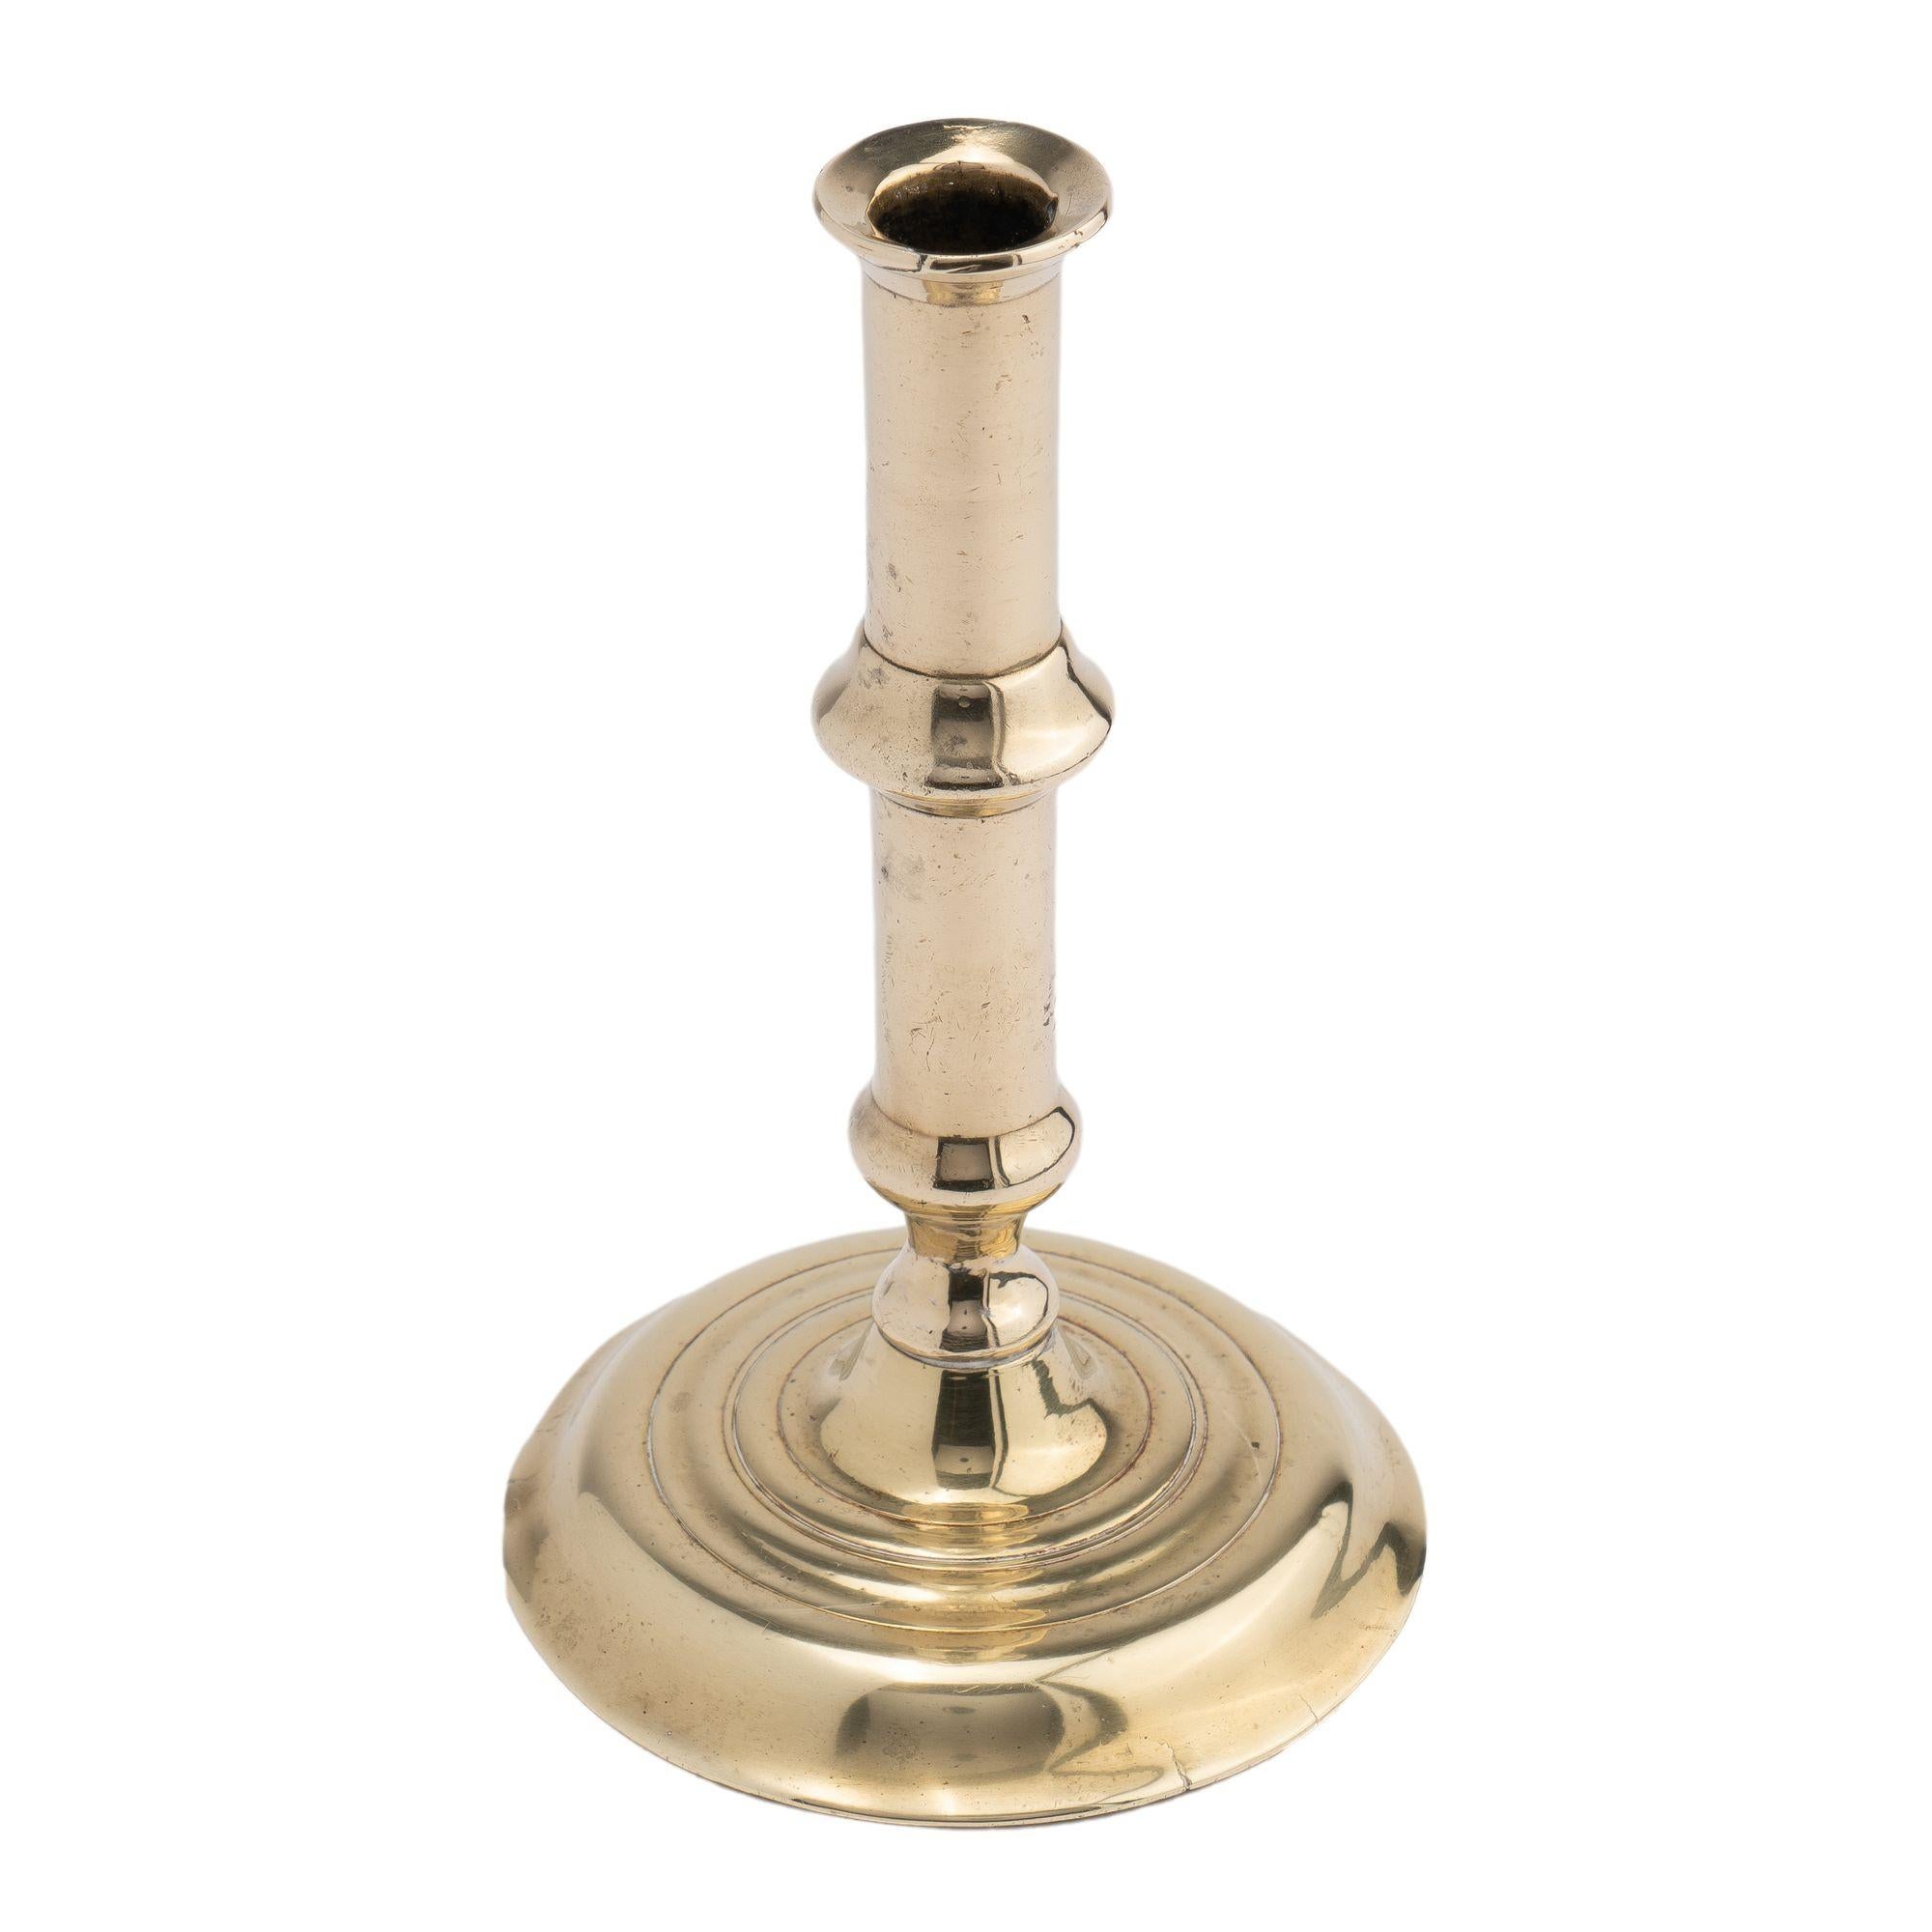 Cast brass cannon barrel candlestick with medial raised ring above a knob over waisted pedestal peened to a circular domed base.
Birmingham, England, circa 1720-40.